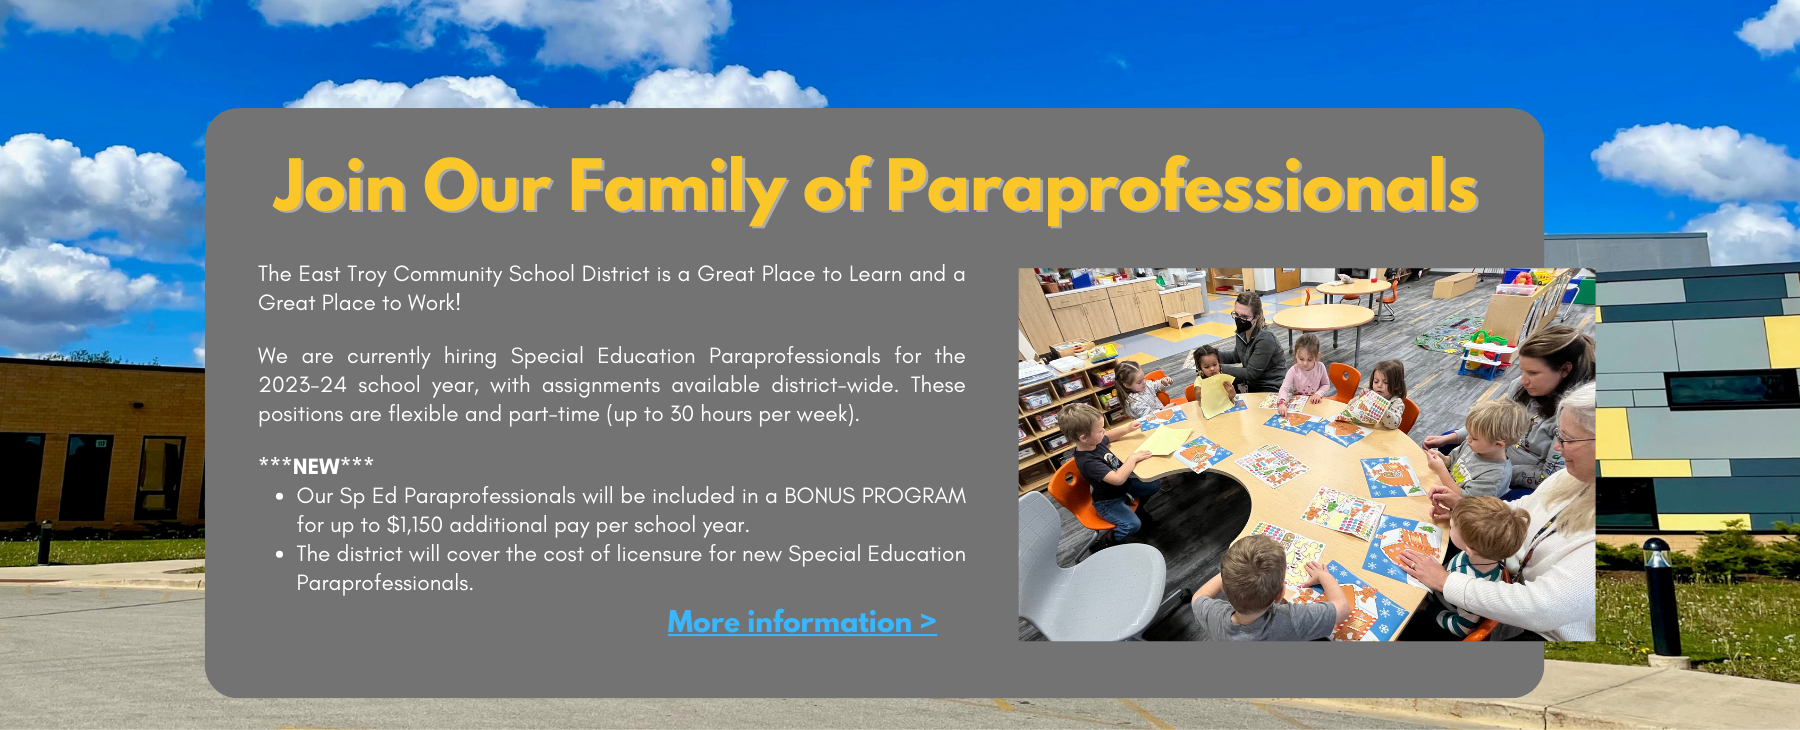 Join Our Sp Ed Paraprofessionals